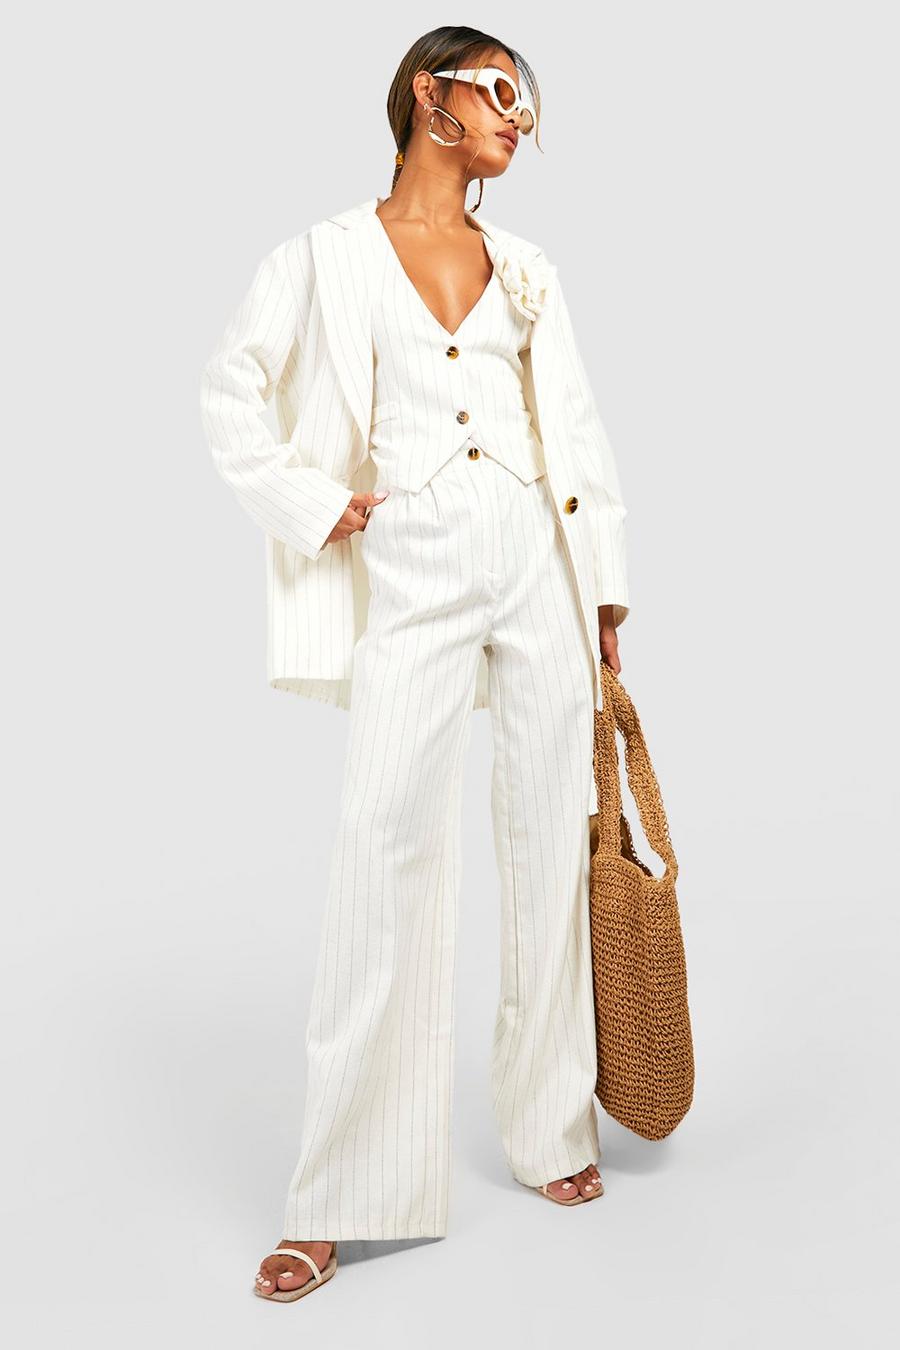 White Linen Look High Waisted Tailored Pants